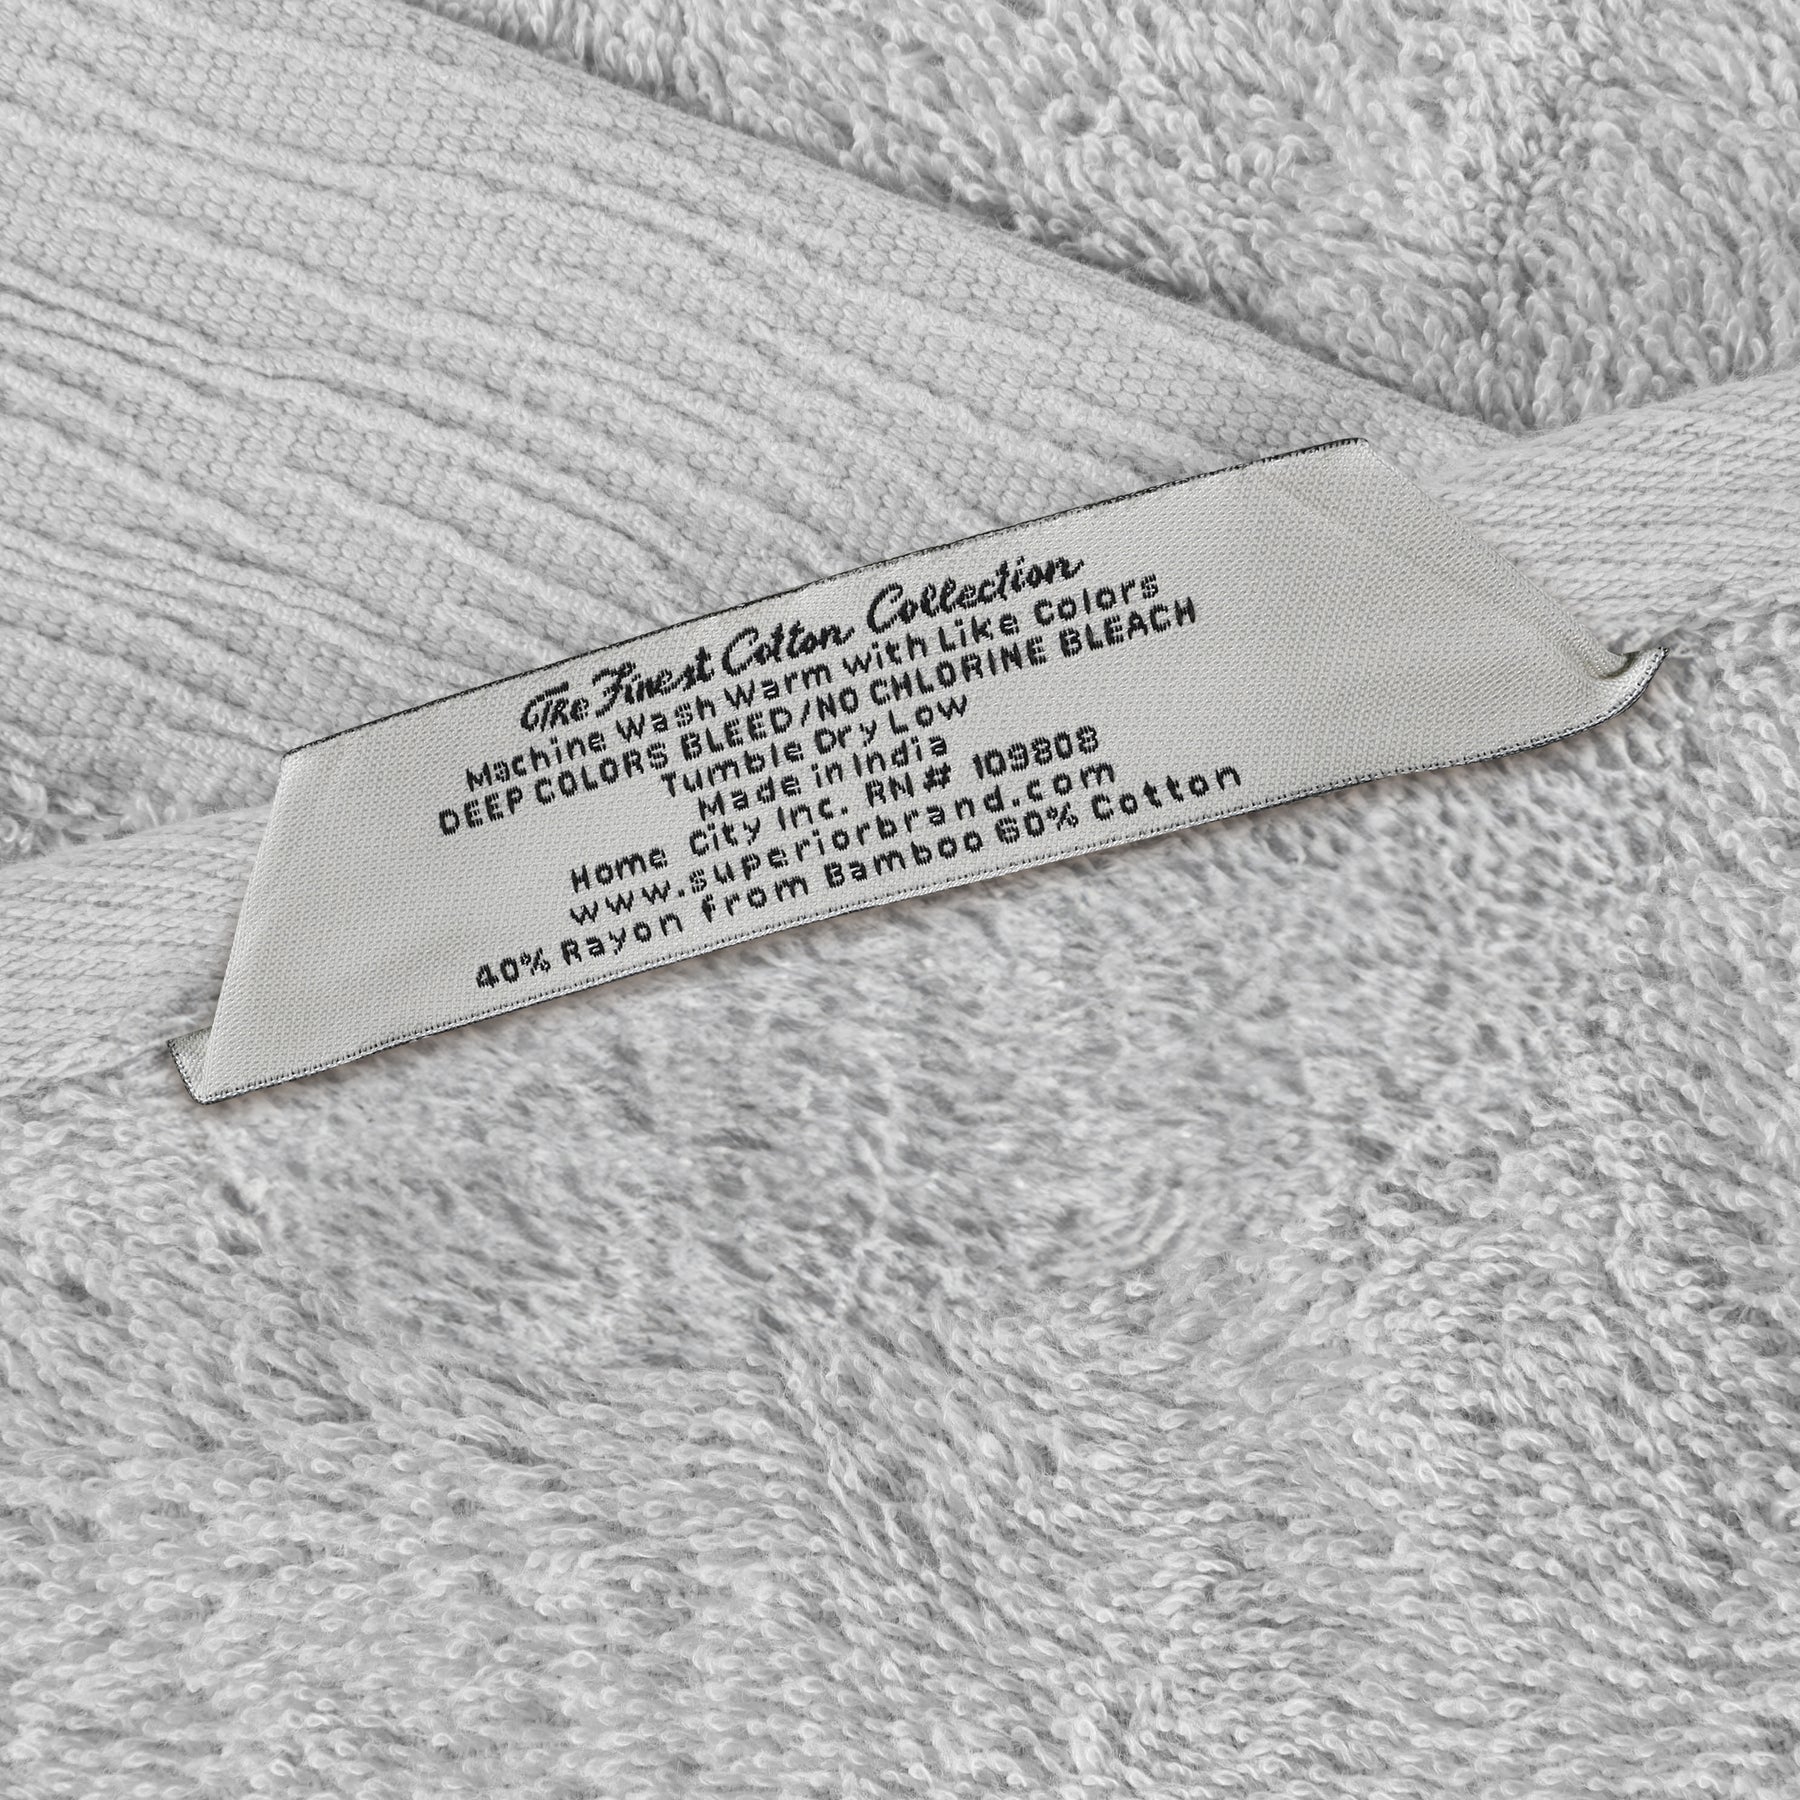 Rayon from Bamboo Eco-Friendly Fluffy Soft Solid Bath Sheet - Platinum